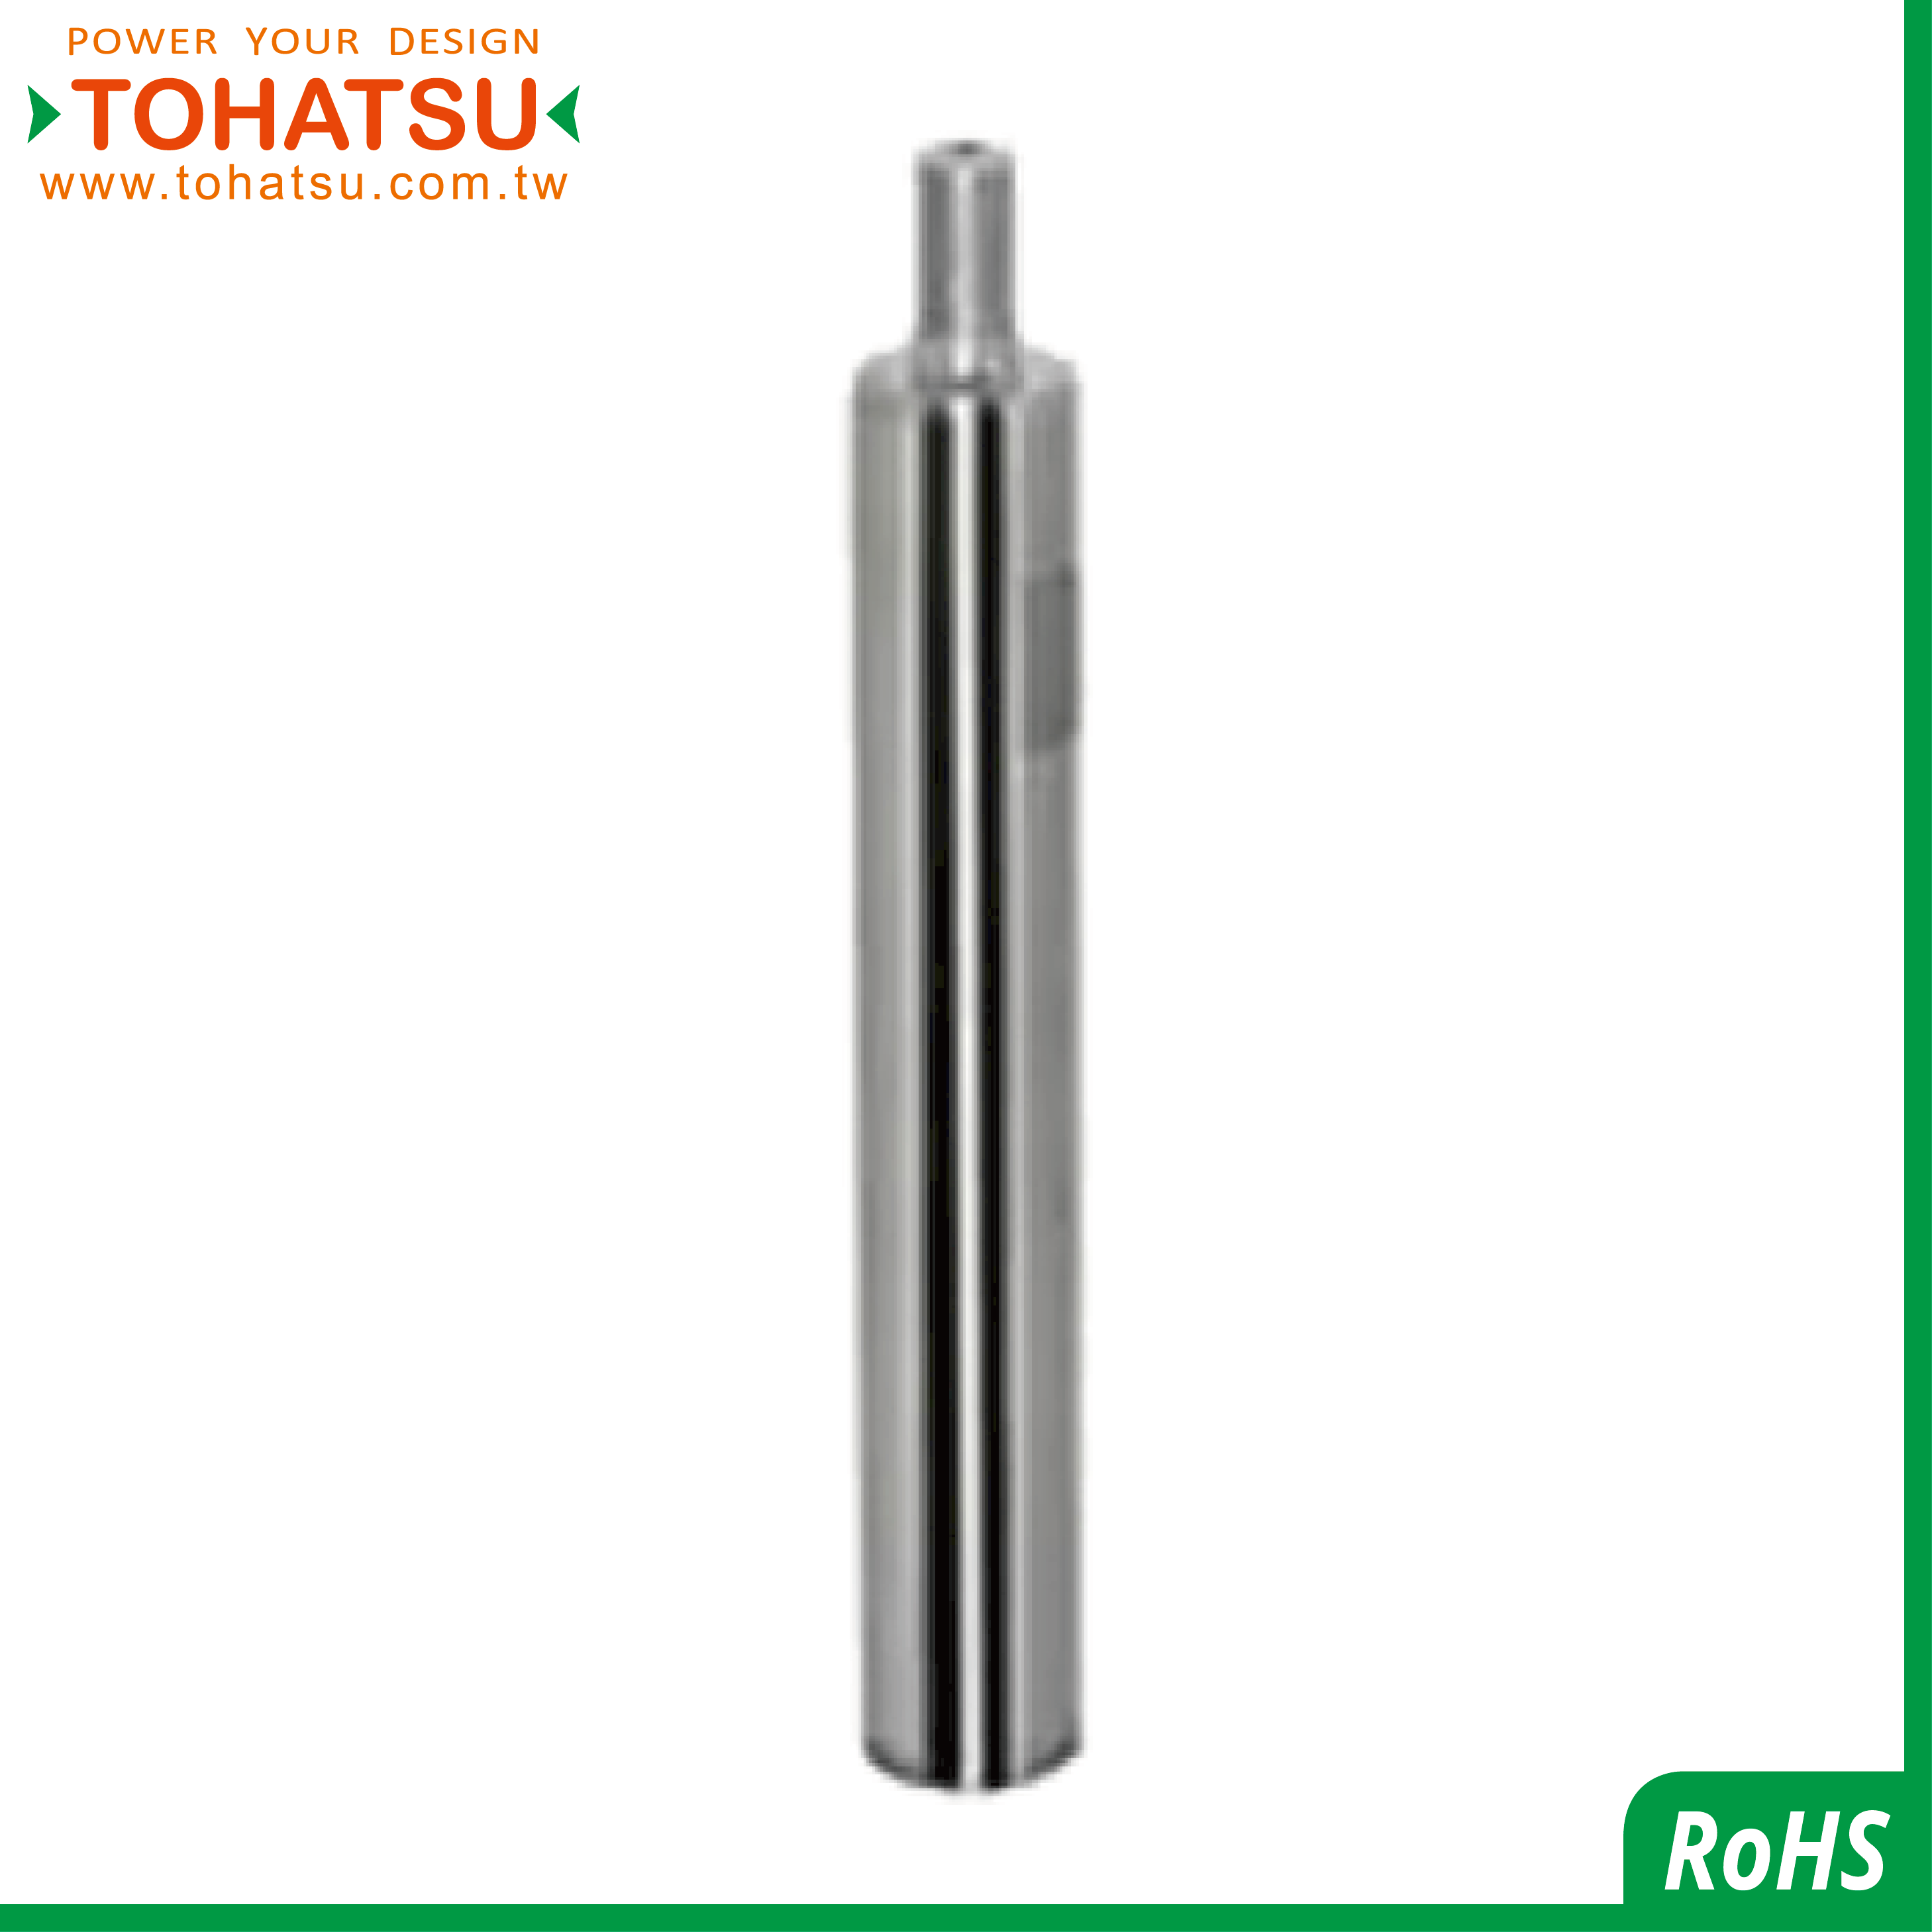 Precision Linear Shafts (One Ends Male Thread／One End Female Thread with Undercut and Wrench Flats)